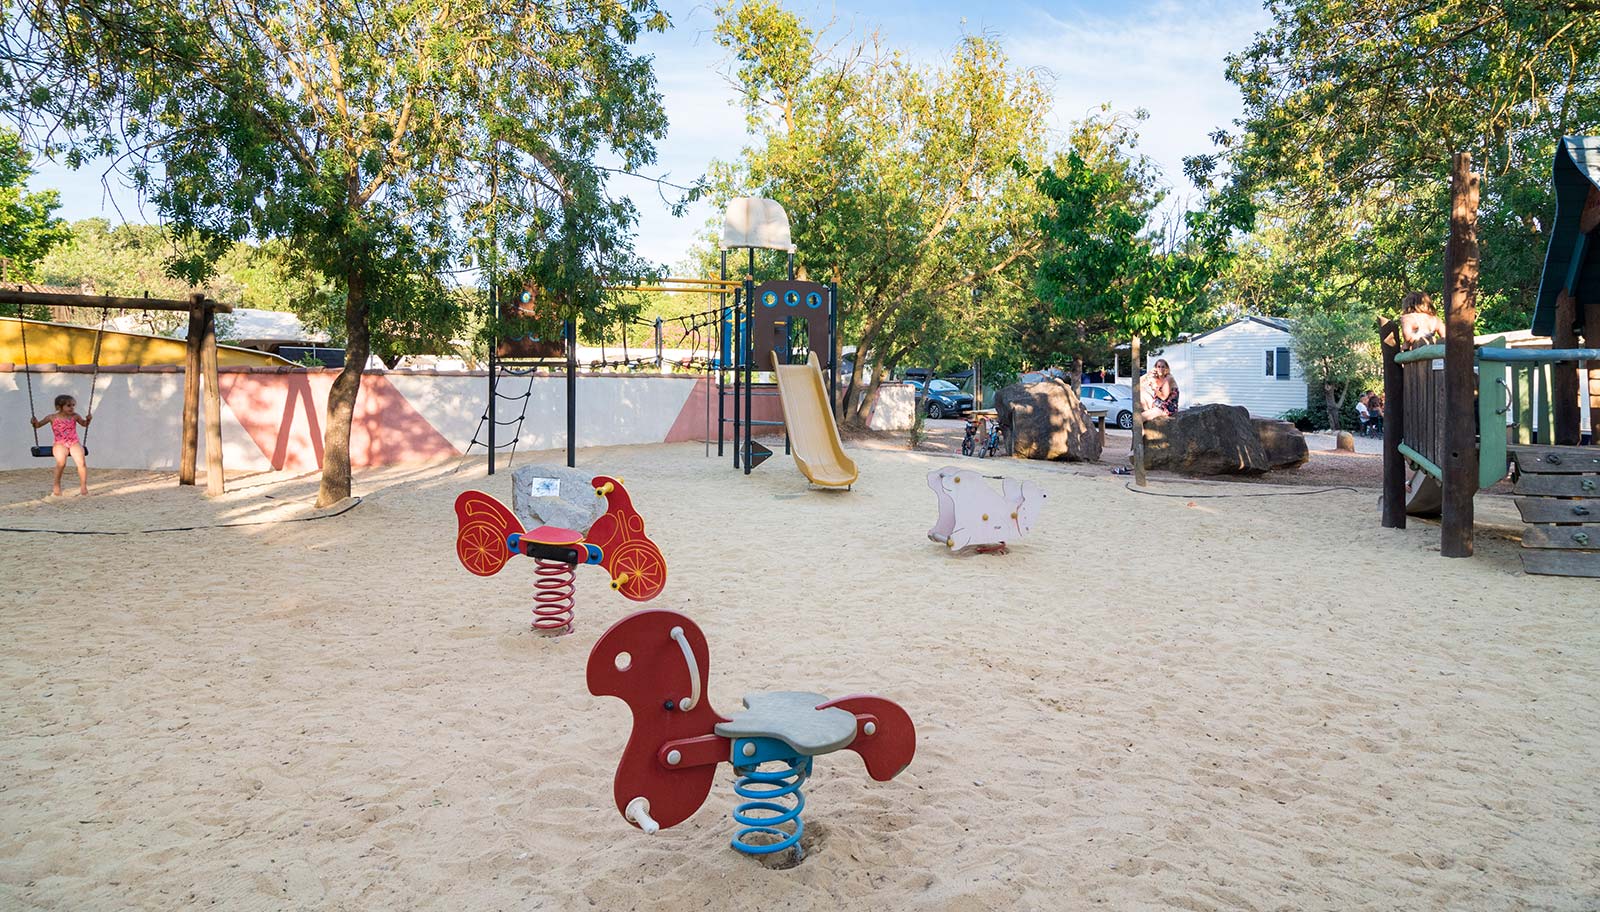 The playground for children at Les Rivières campsite in the Hérault